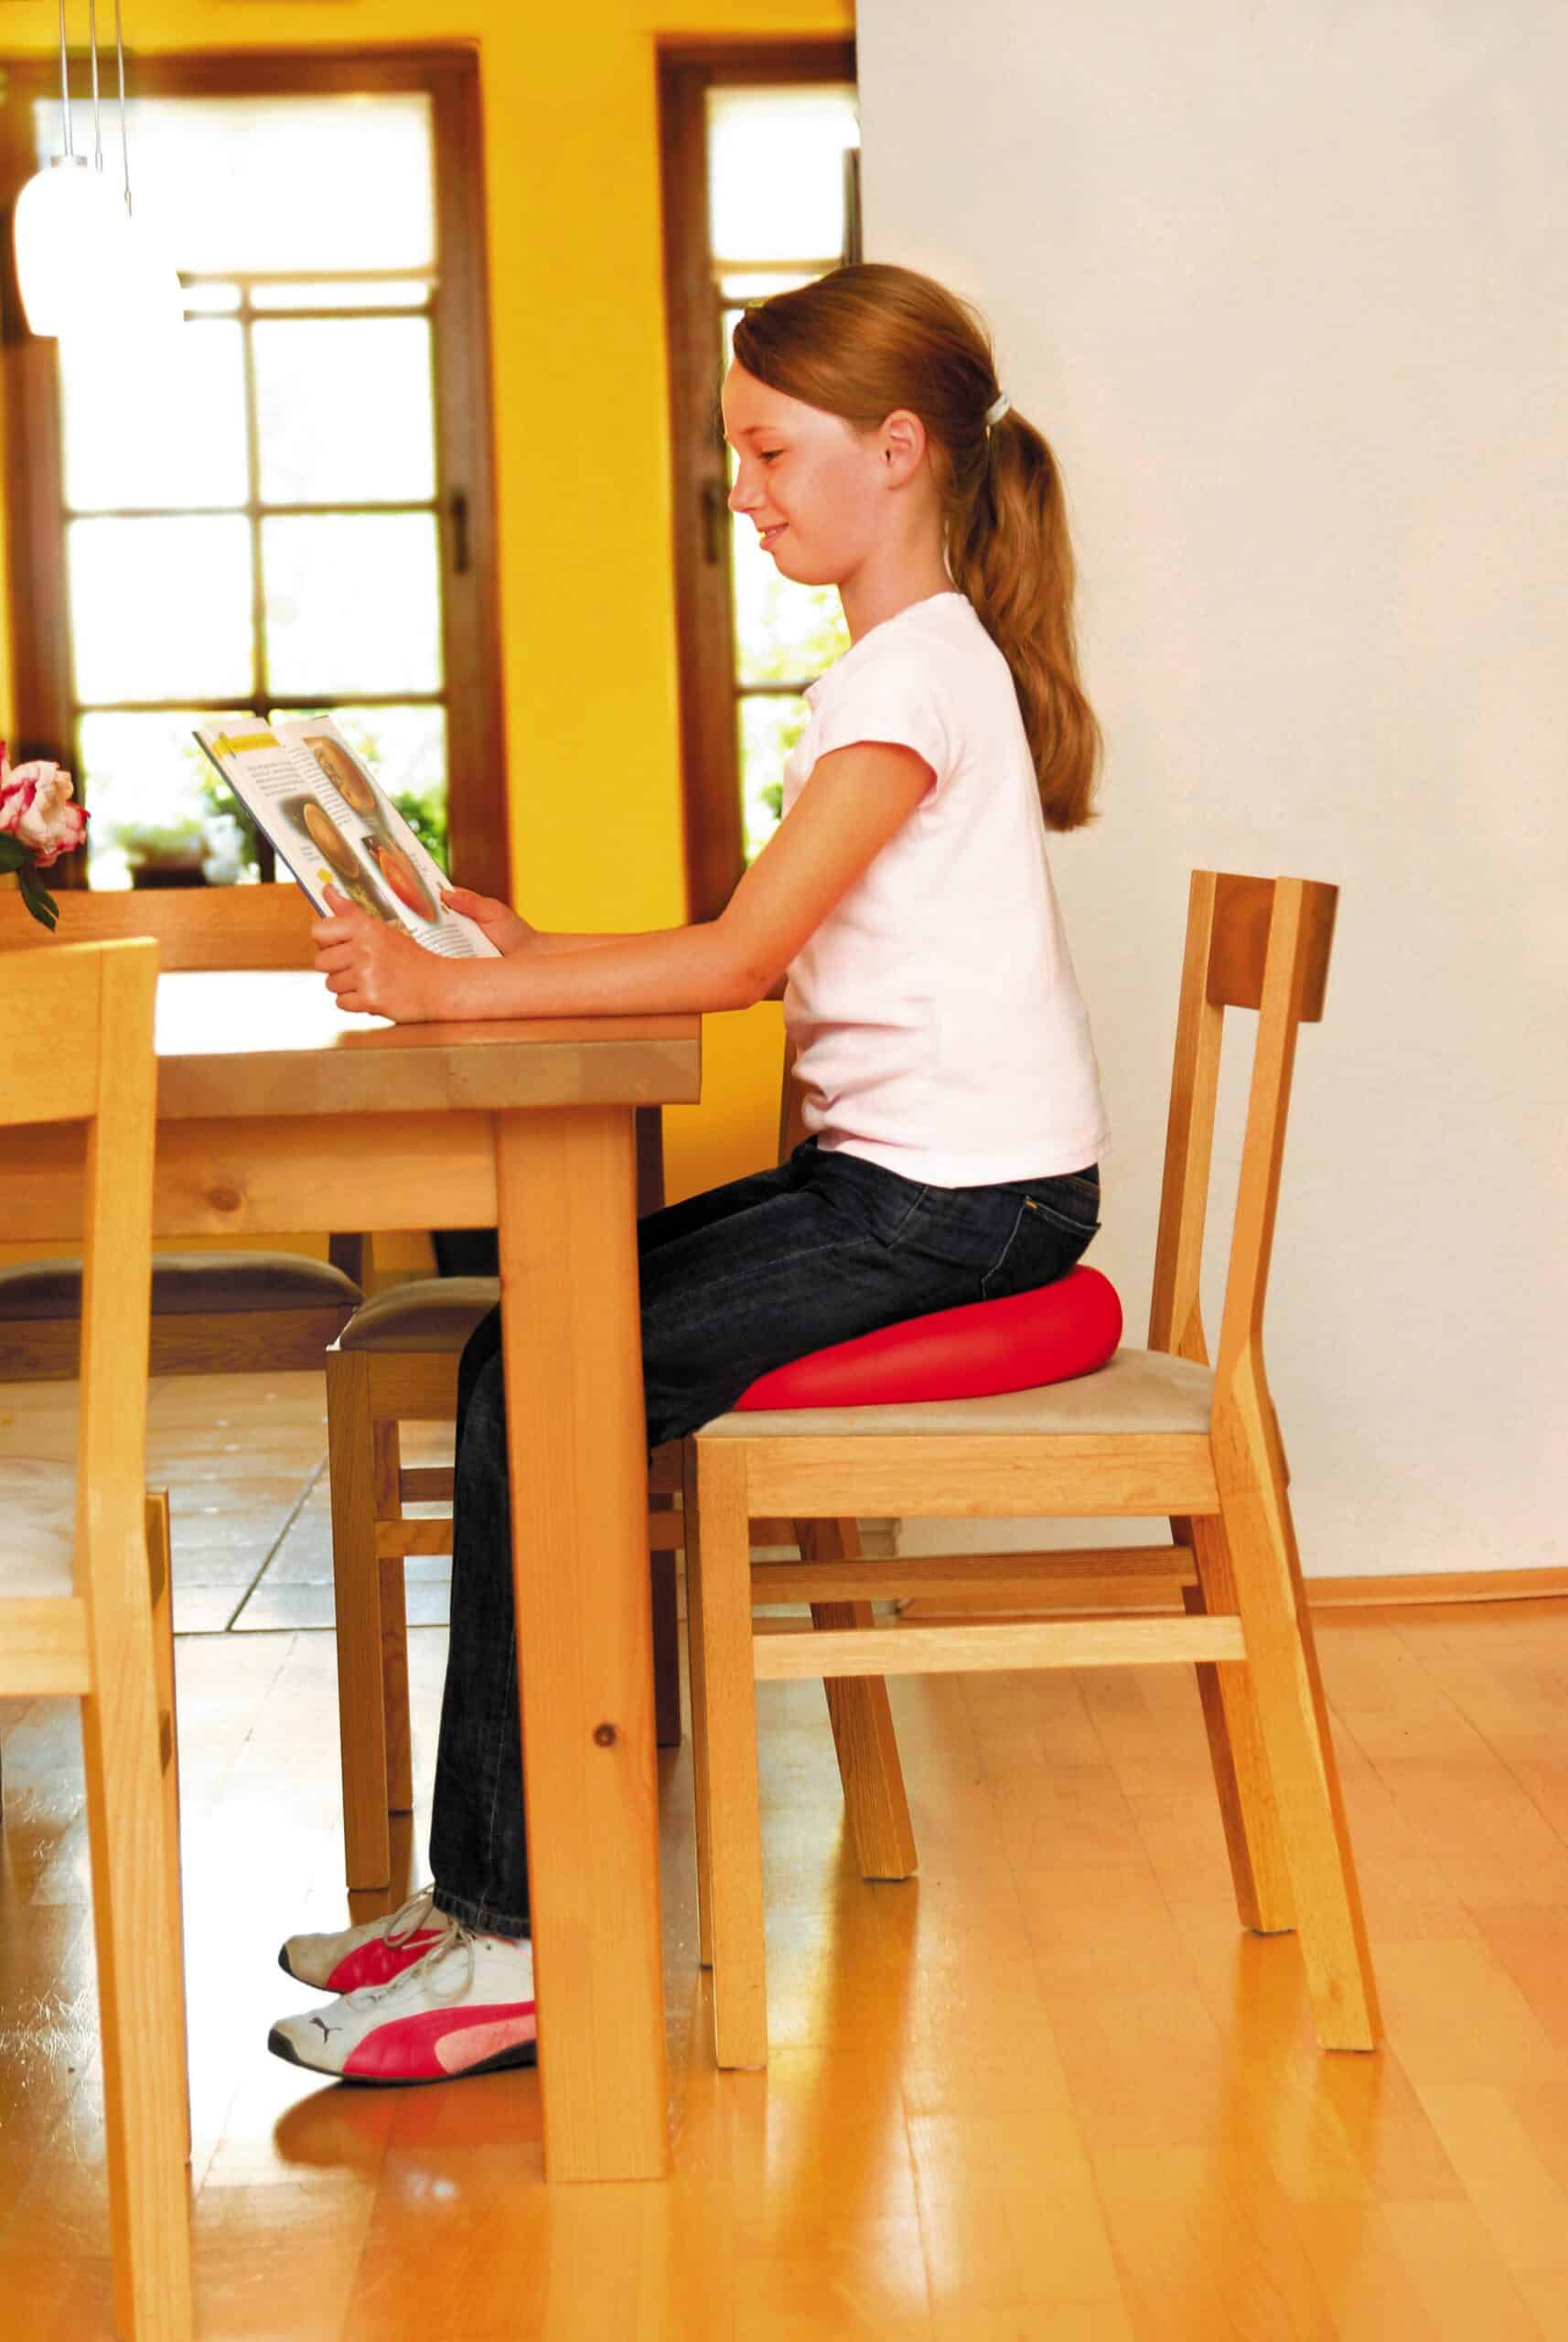 A child is sat at a wooden dining room table reating a book. She is sat on a red sitfit plus inflatable cushion